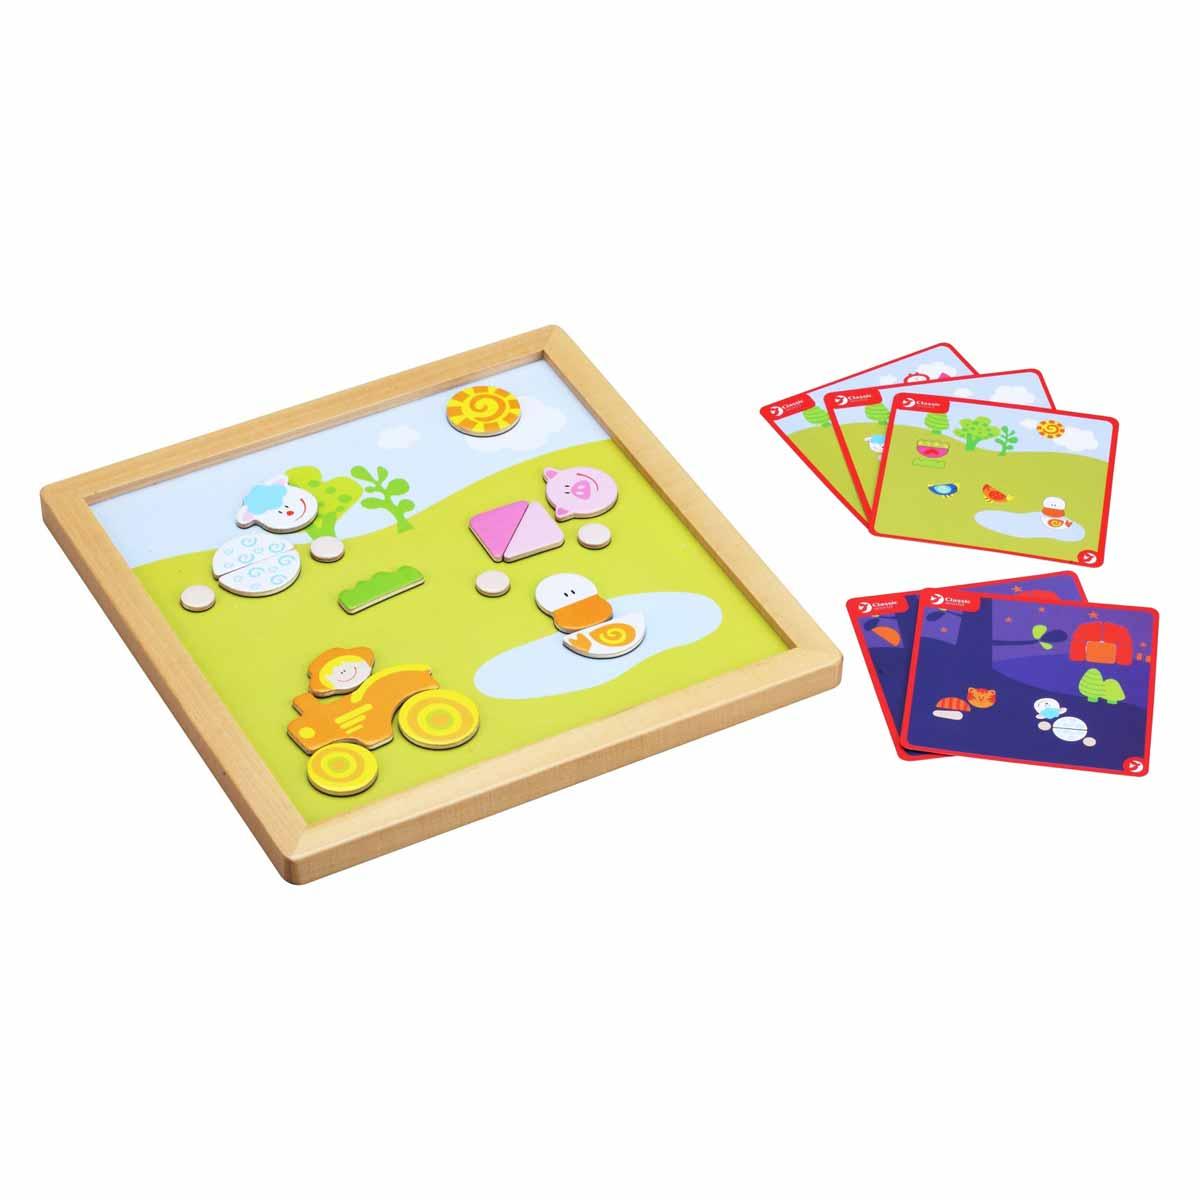 Children's wooden puzzle with magnetic figures - farm - MoonyBoon